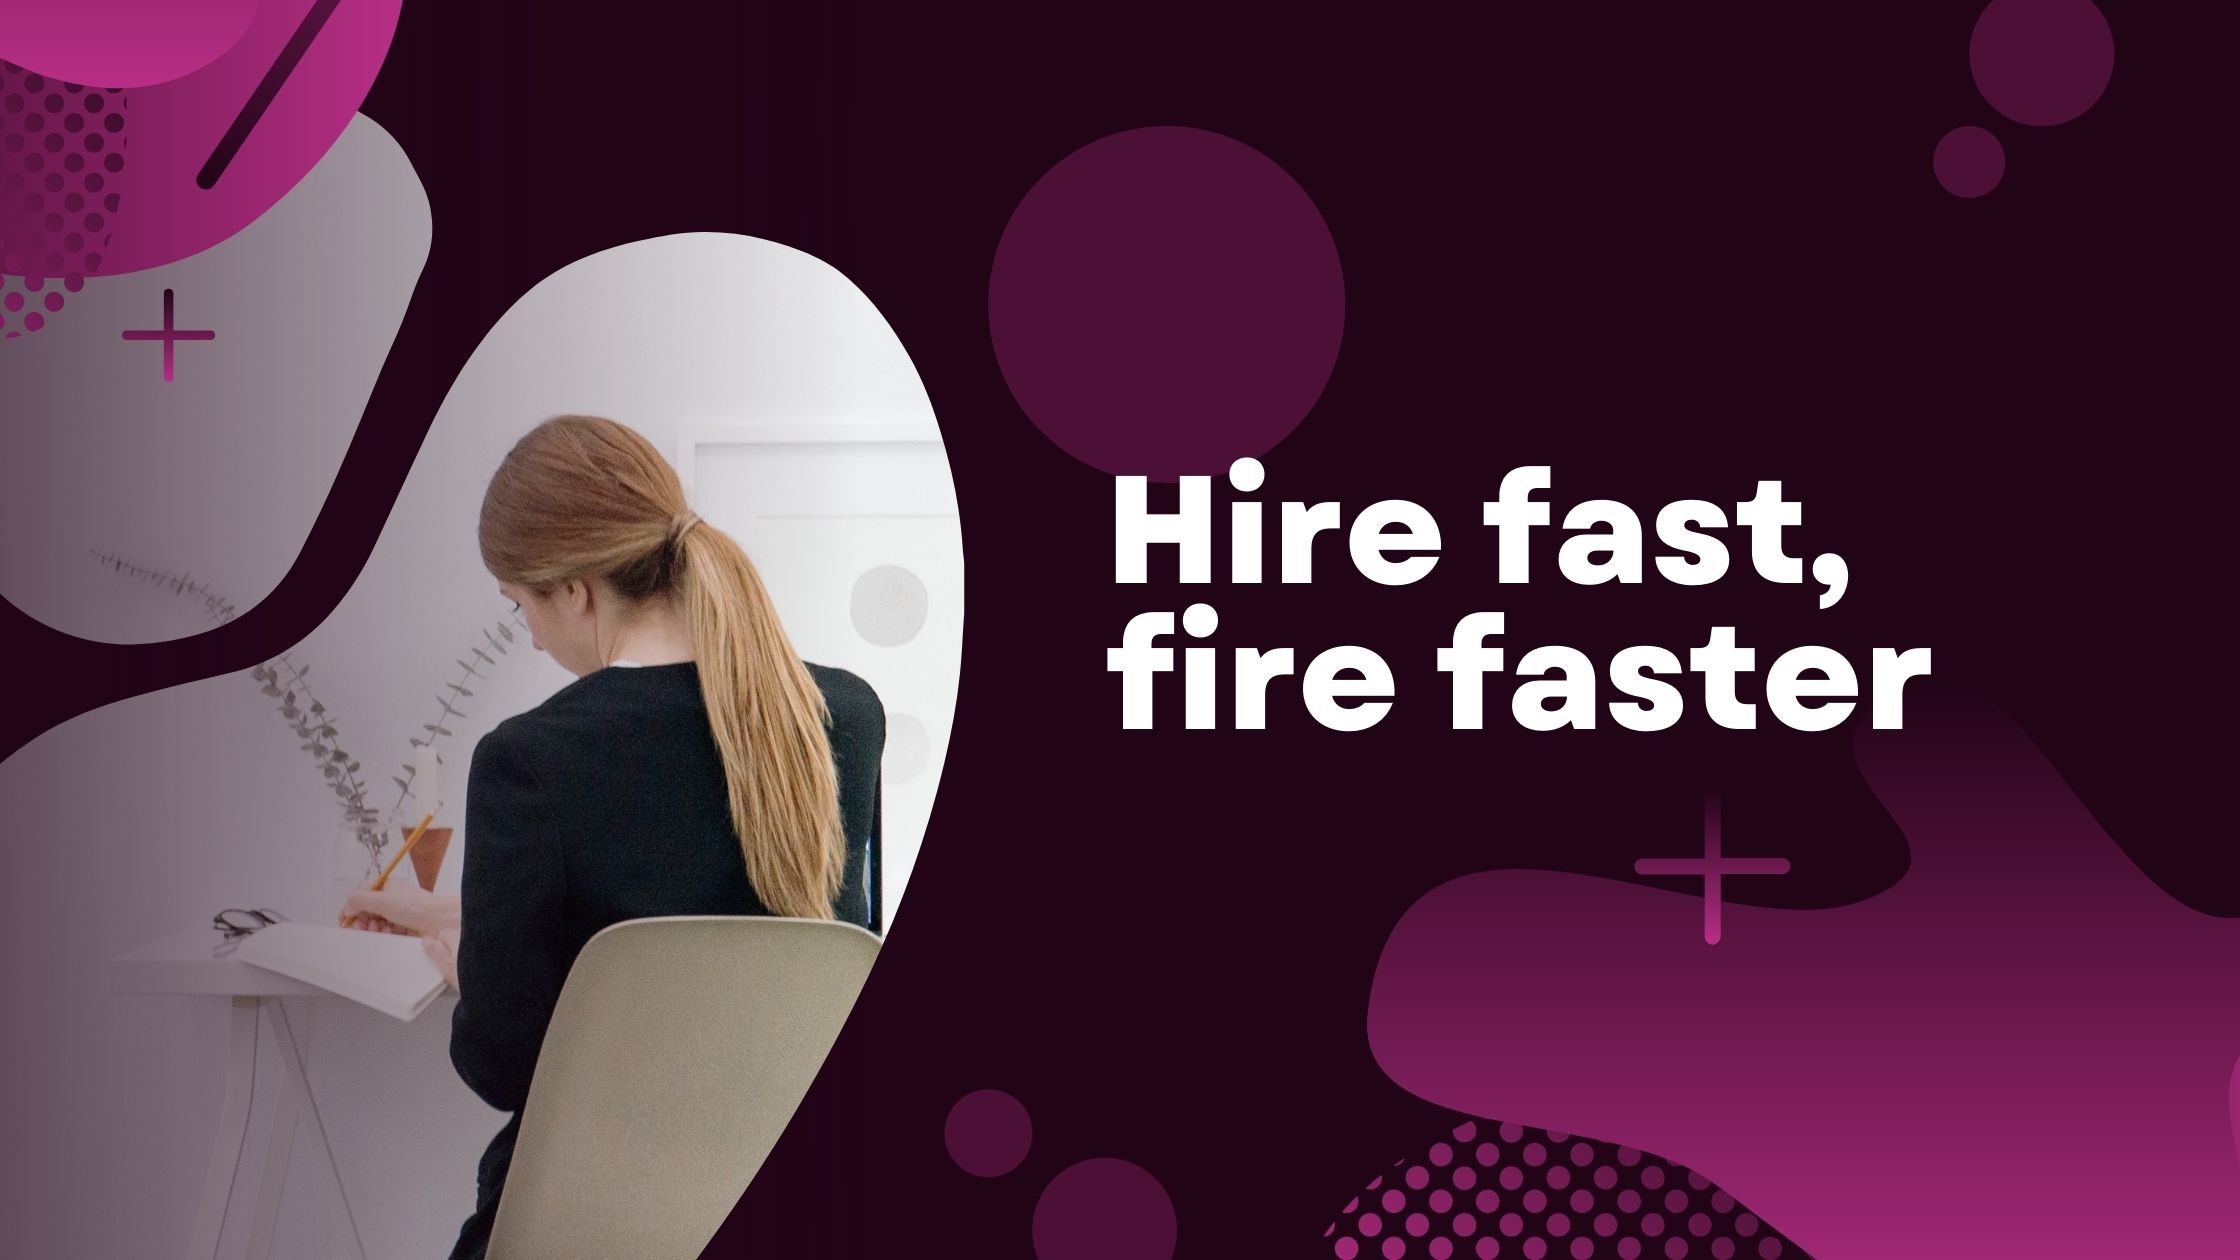 Hire fast, fire faster